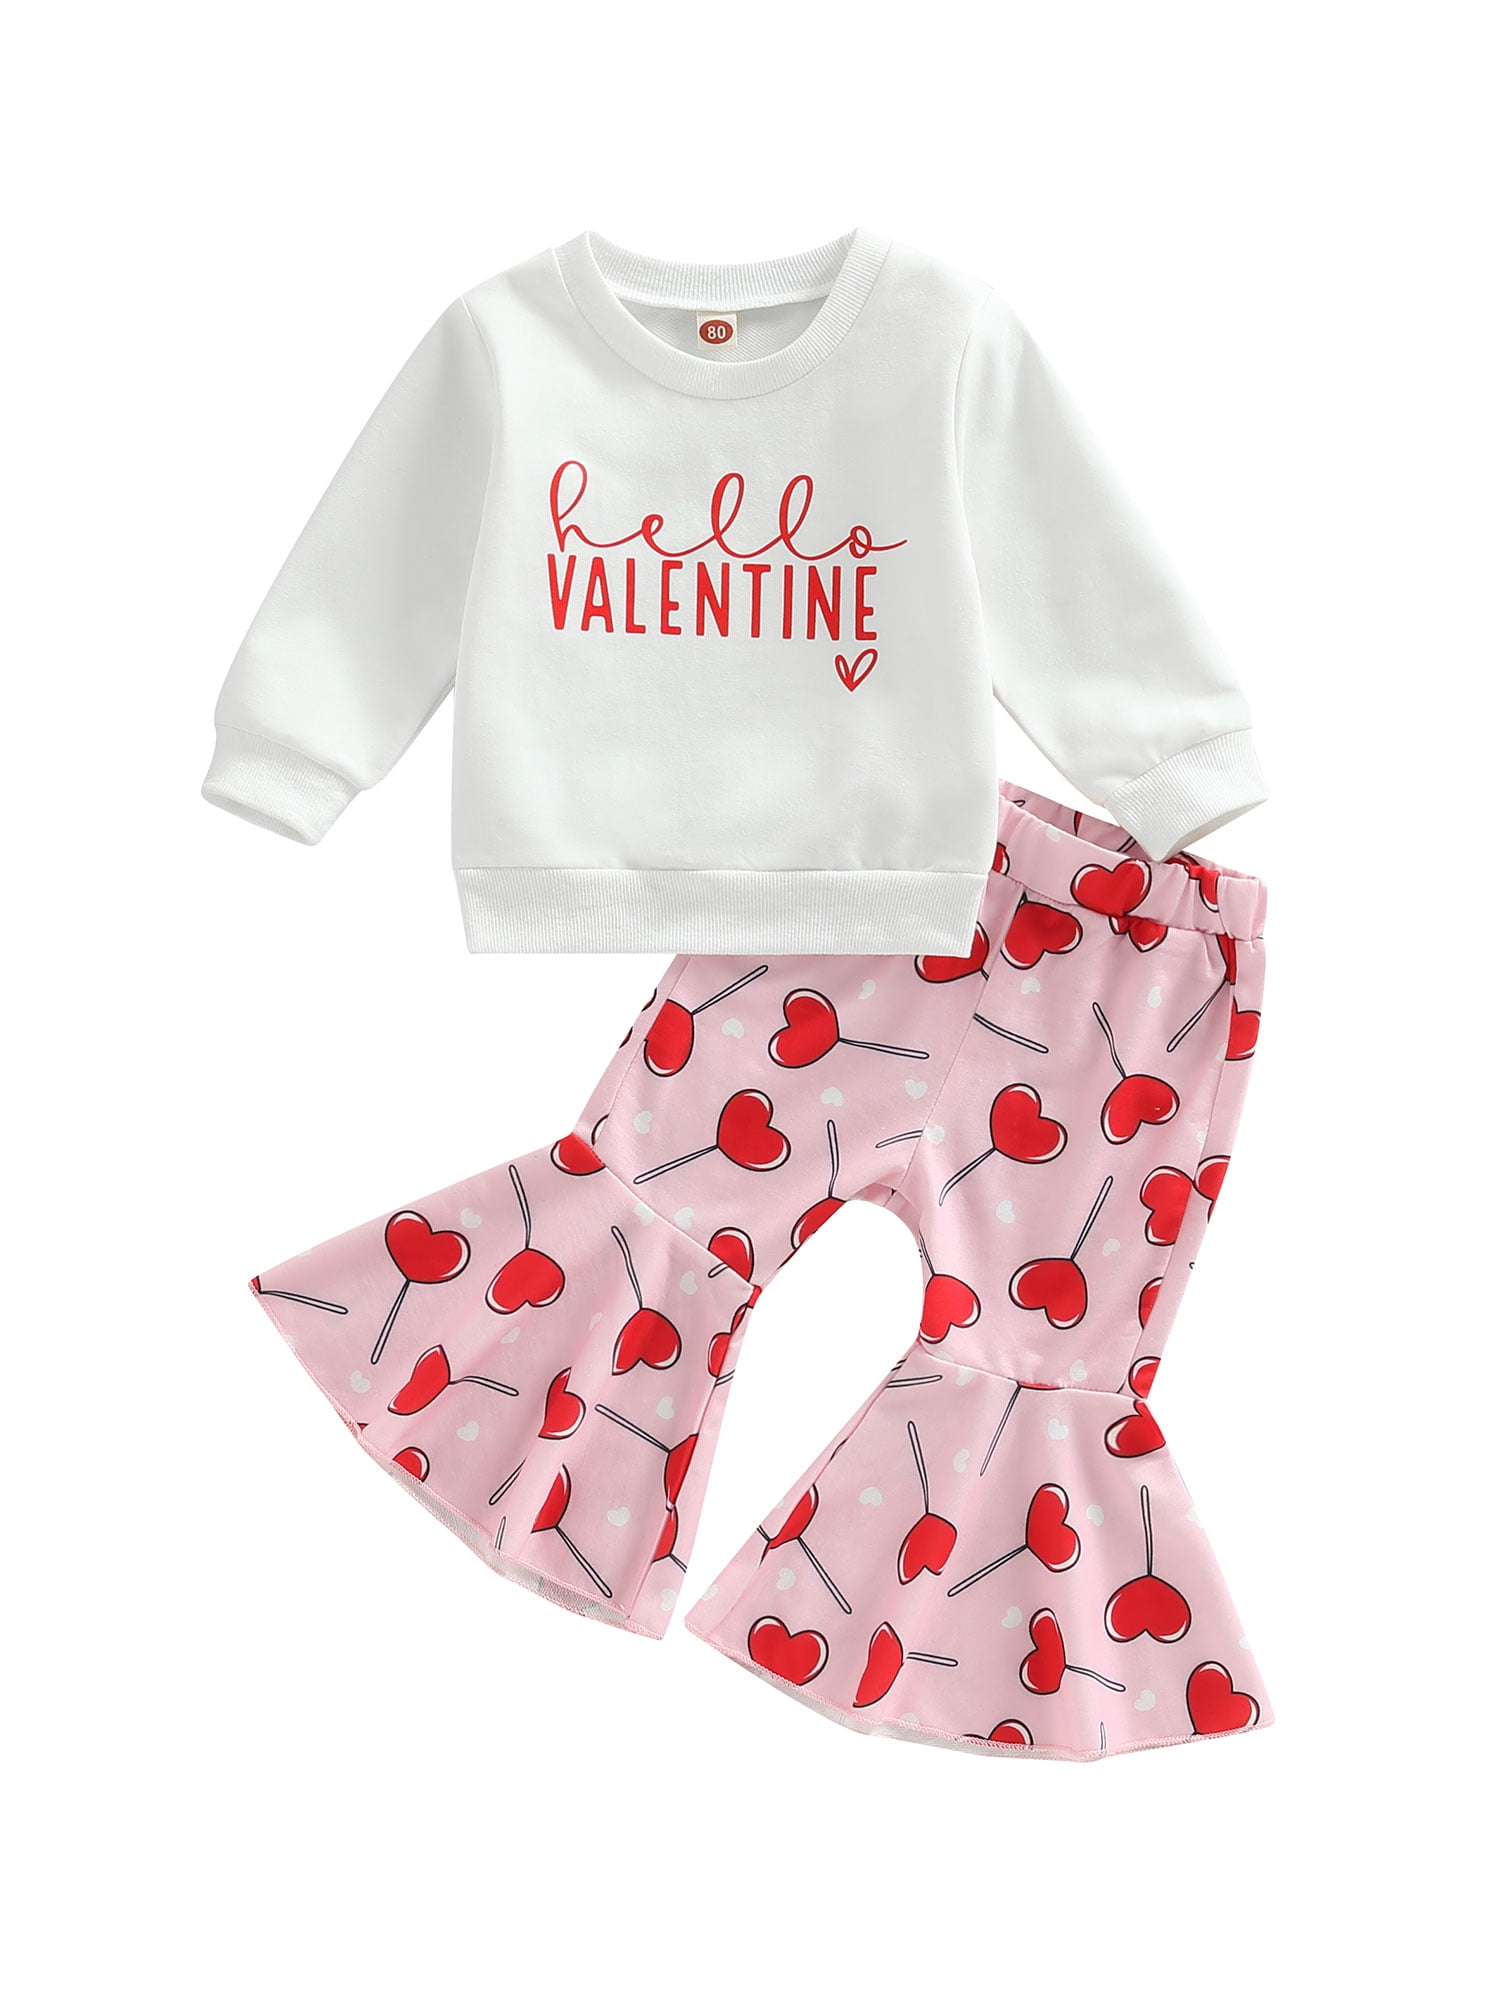 Toddler Baby Girl Valentine's Day Outfit Clothes Heart Letter Print ...